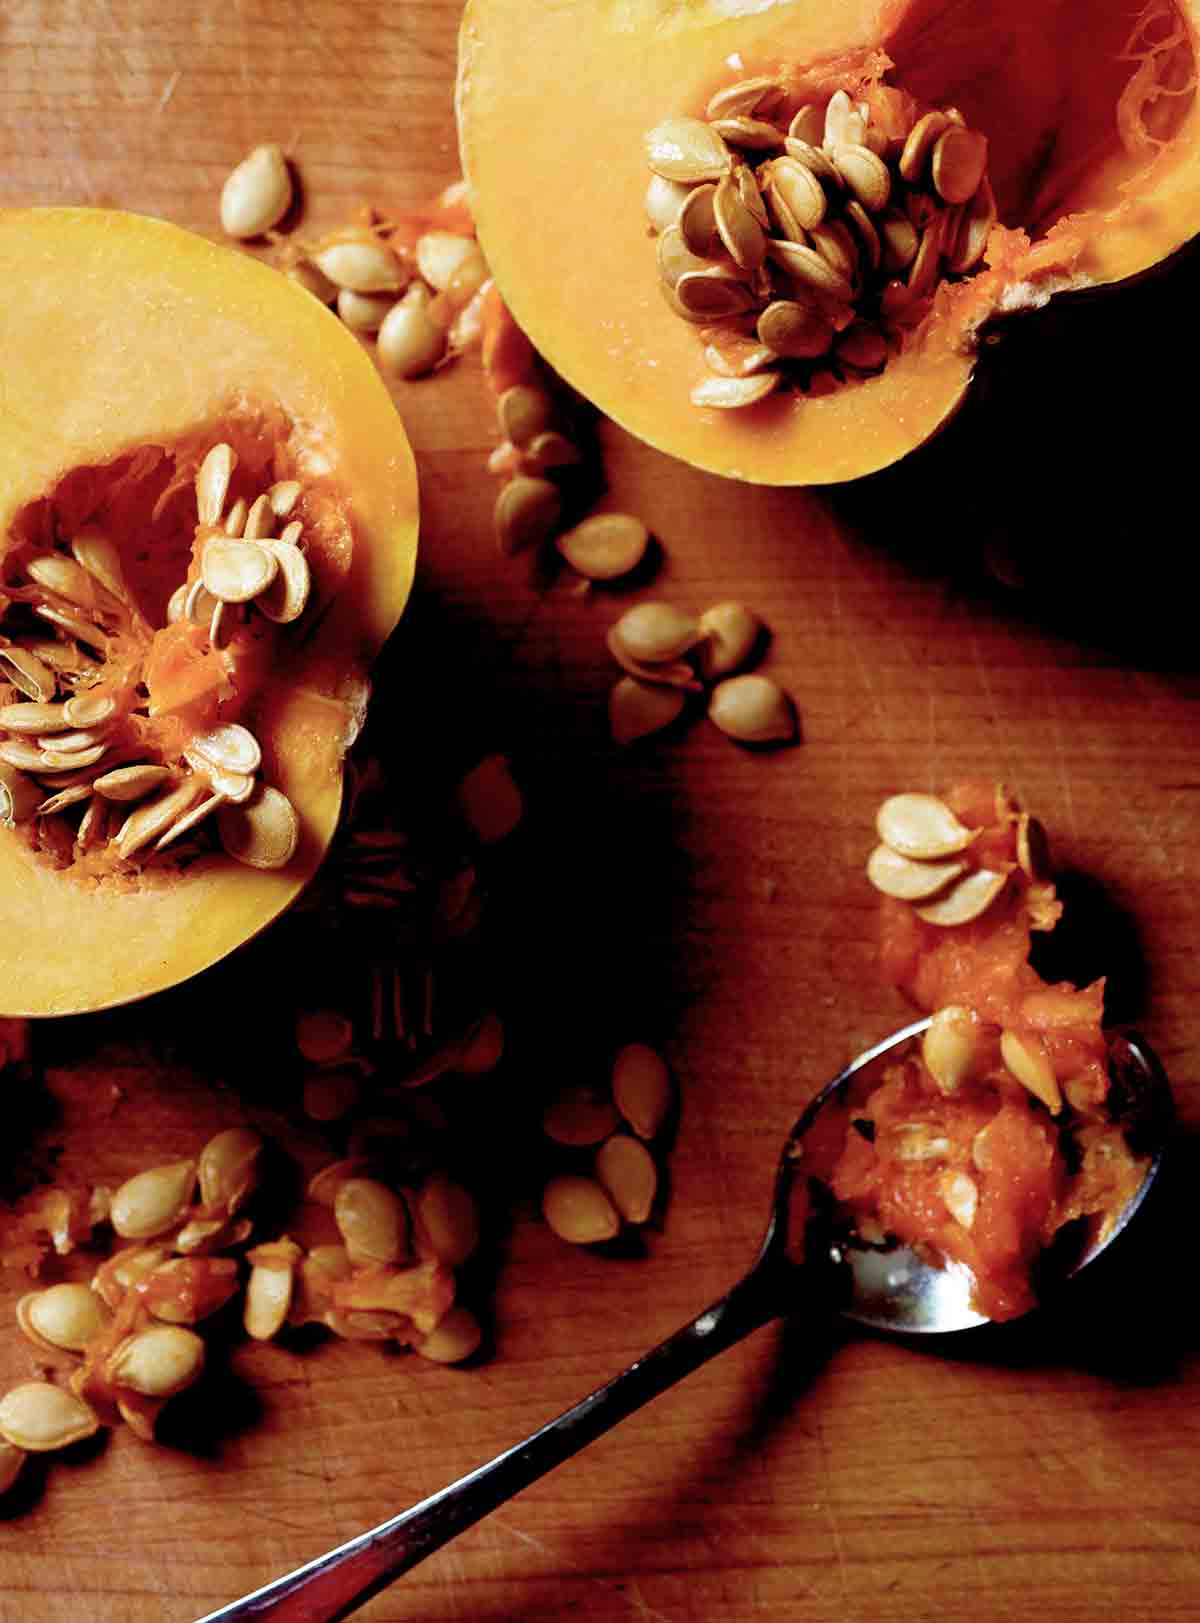 A halved butternut squash with the seeds partially scooped out to demonstrate how to waste less food.